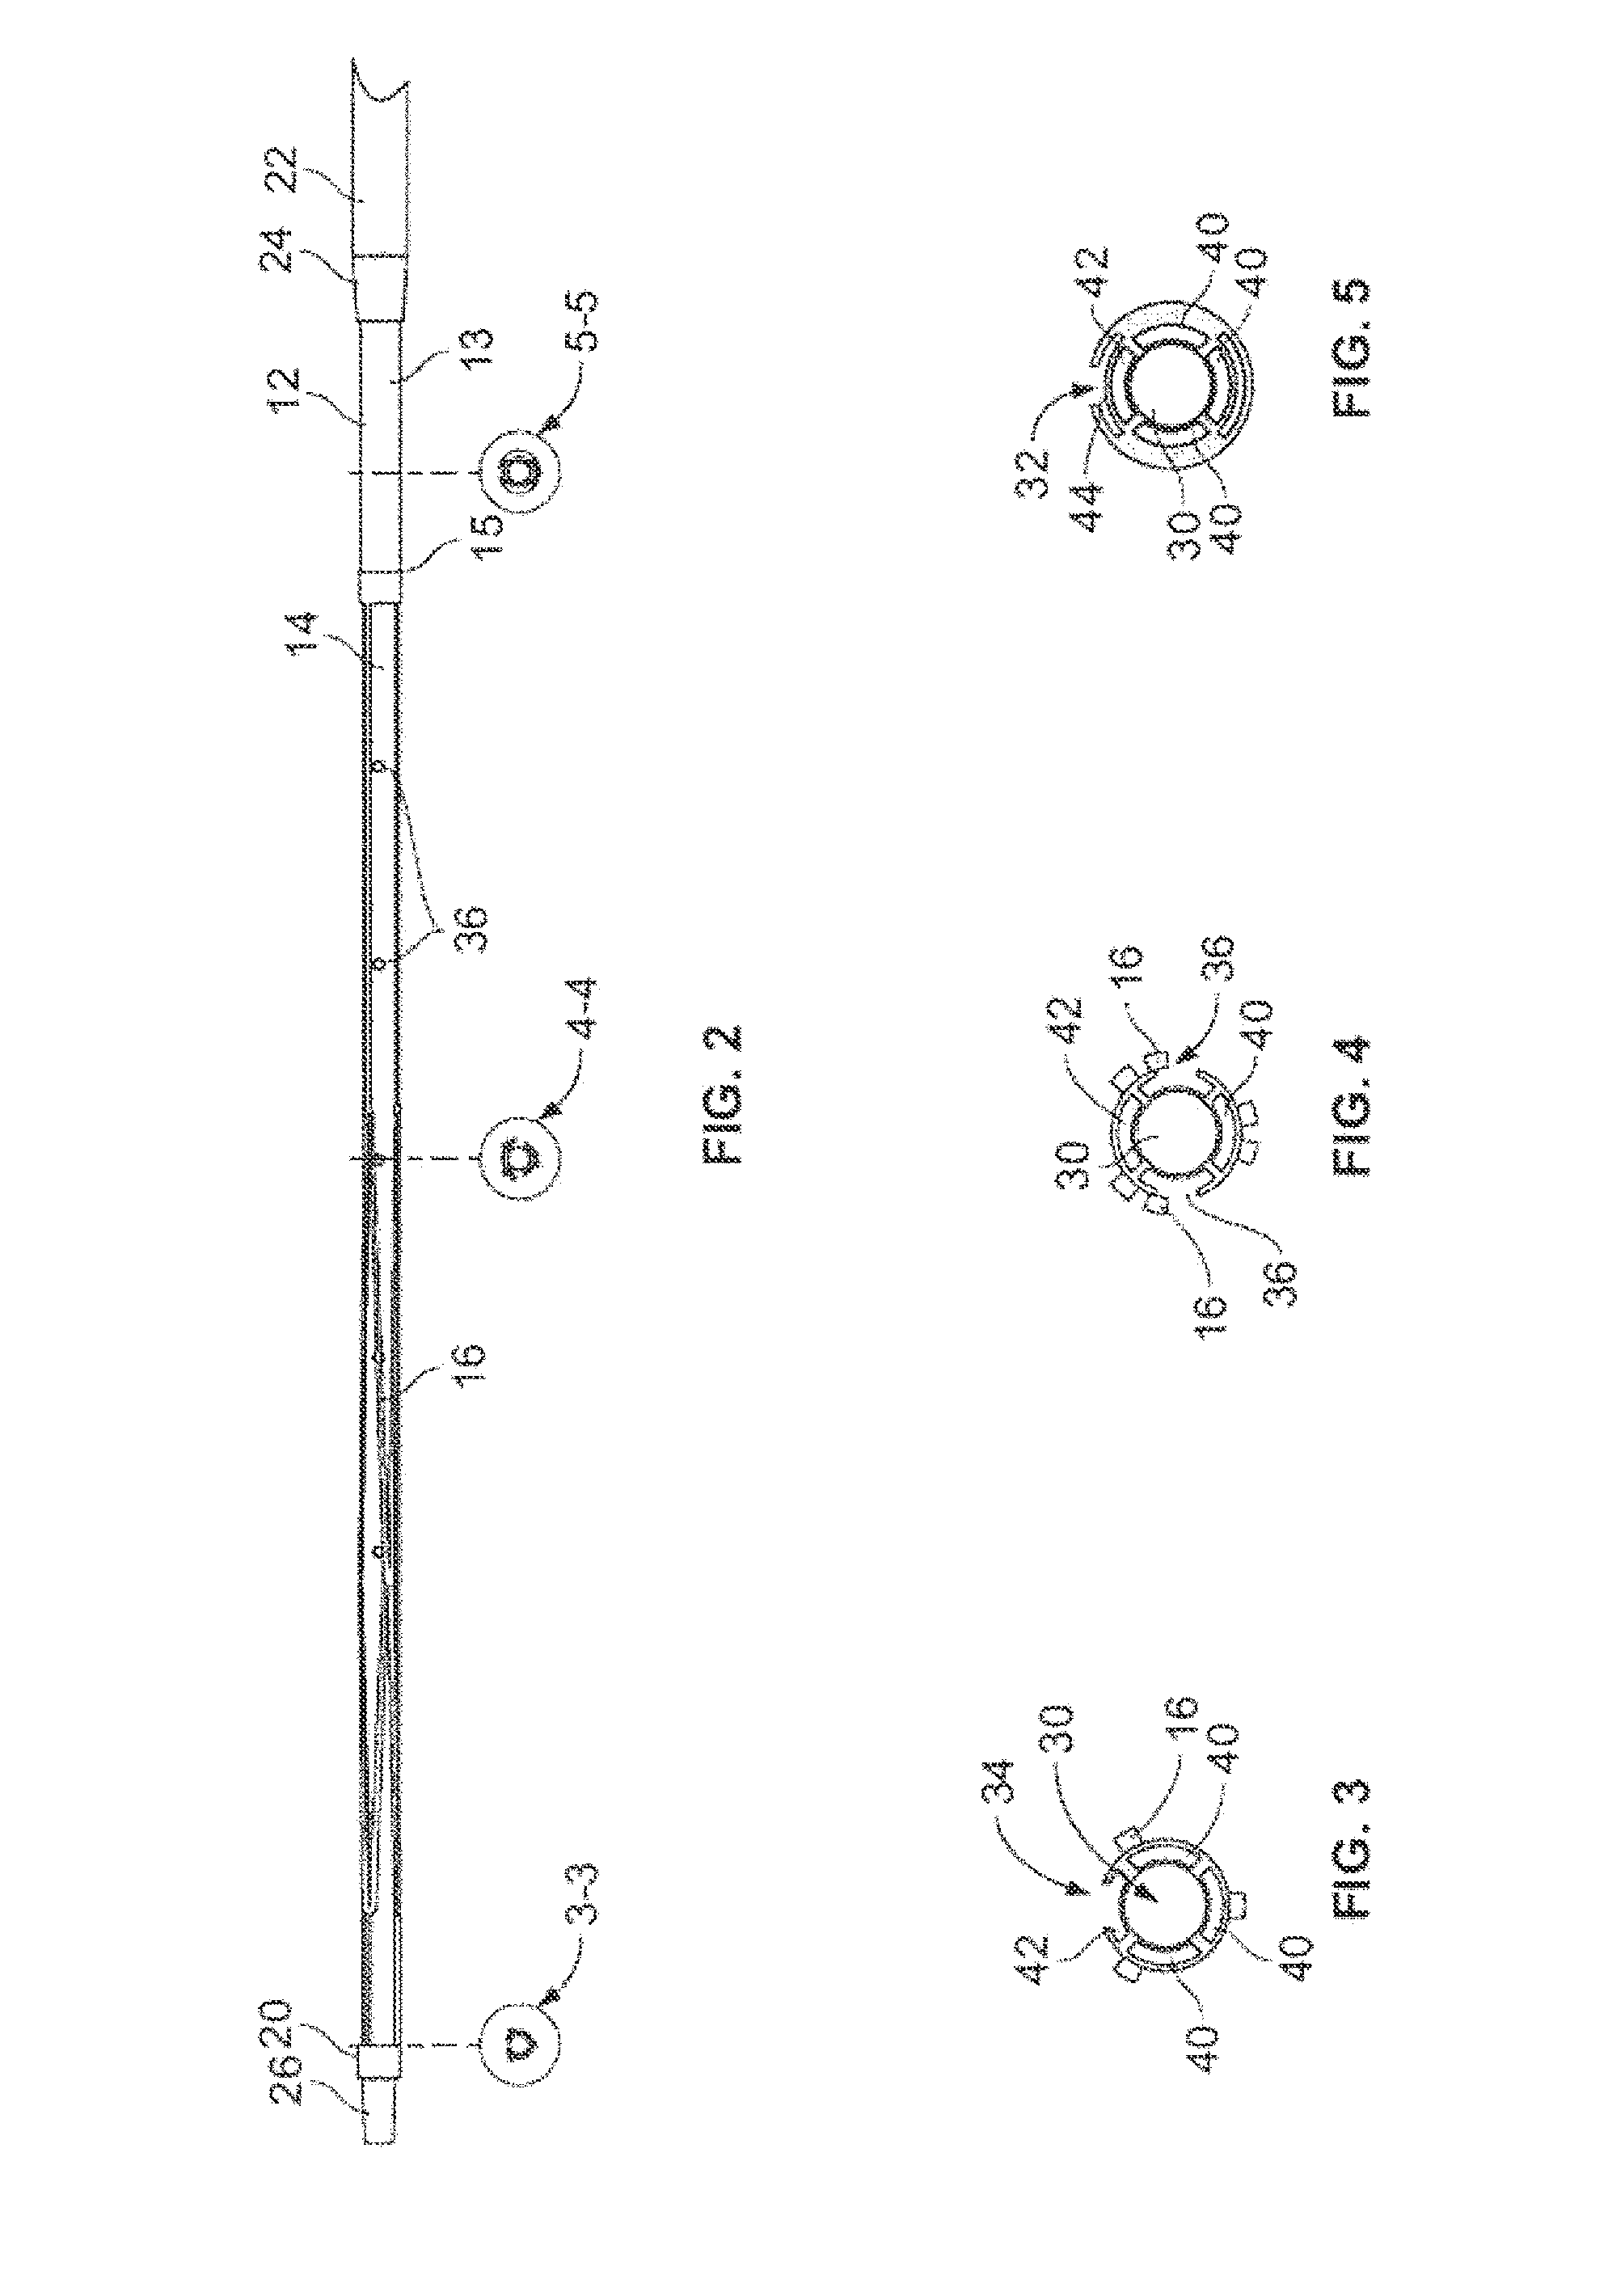 Covered filter catheter apparatus and method of using same